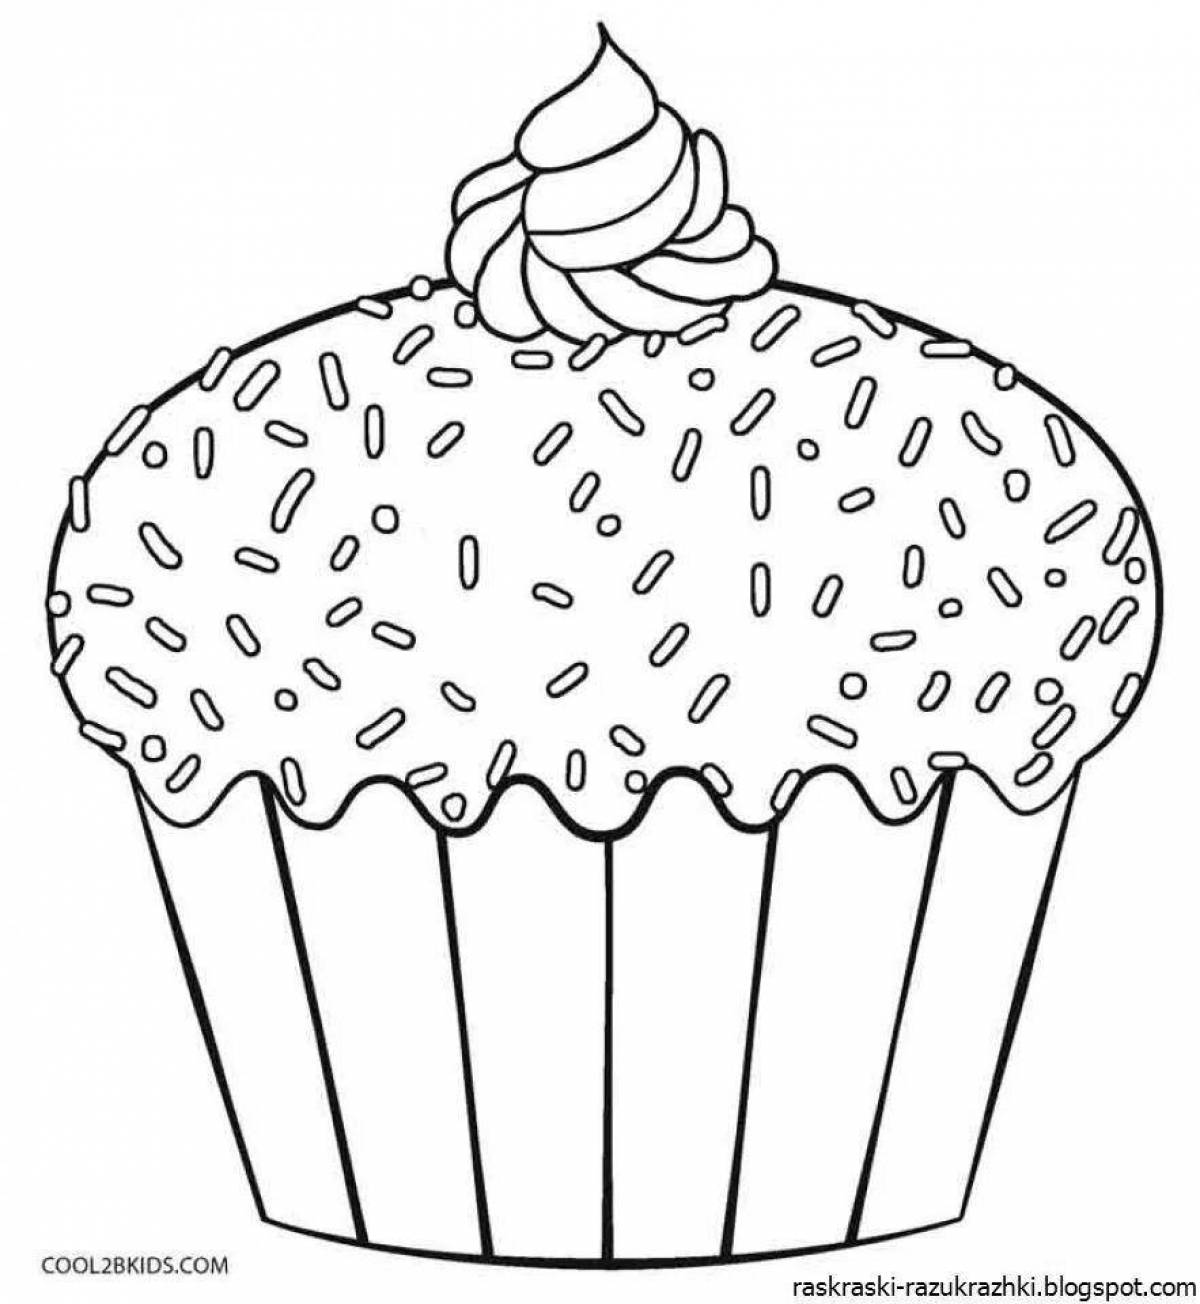 Appetizing cake coloring book